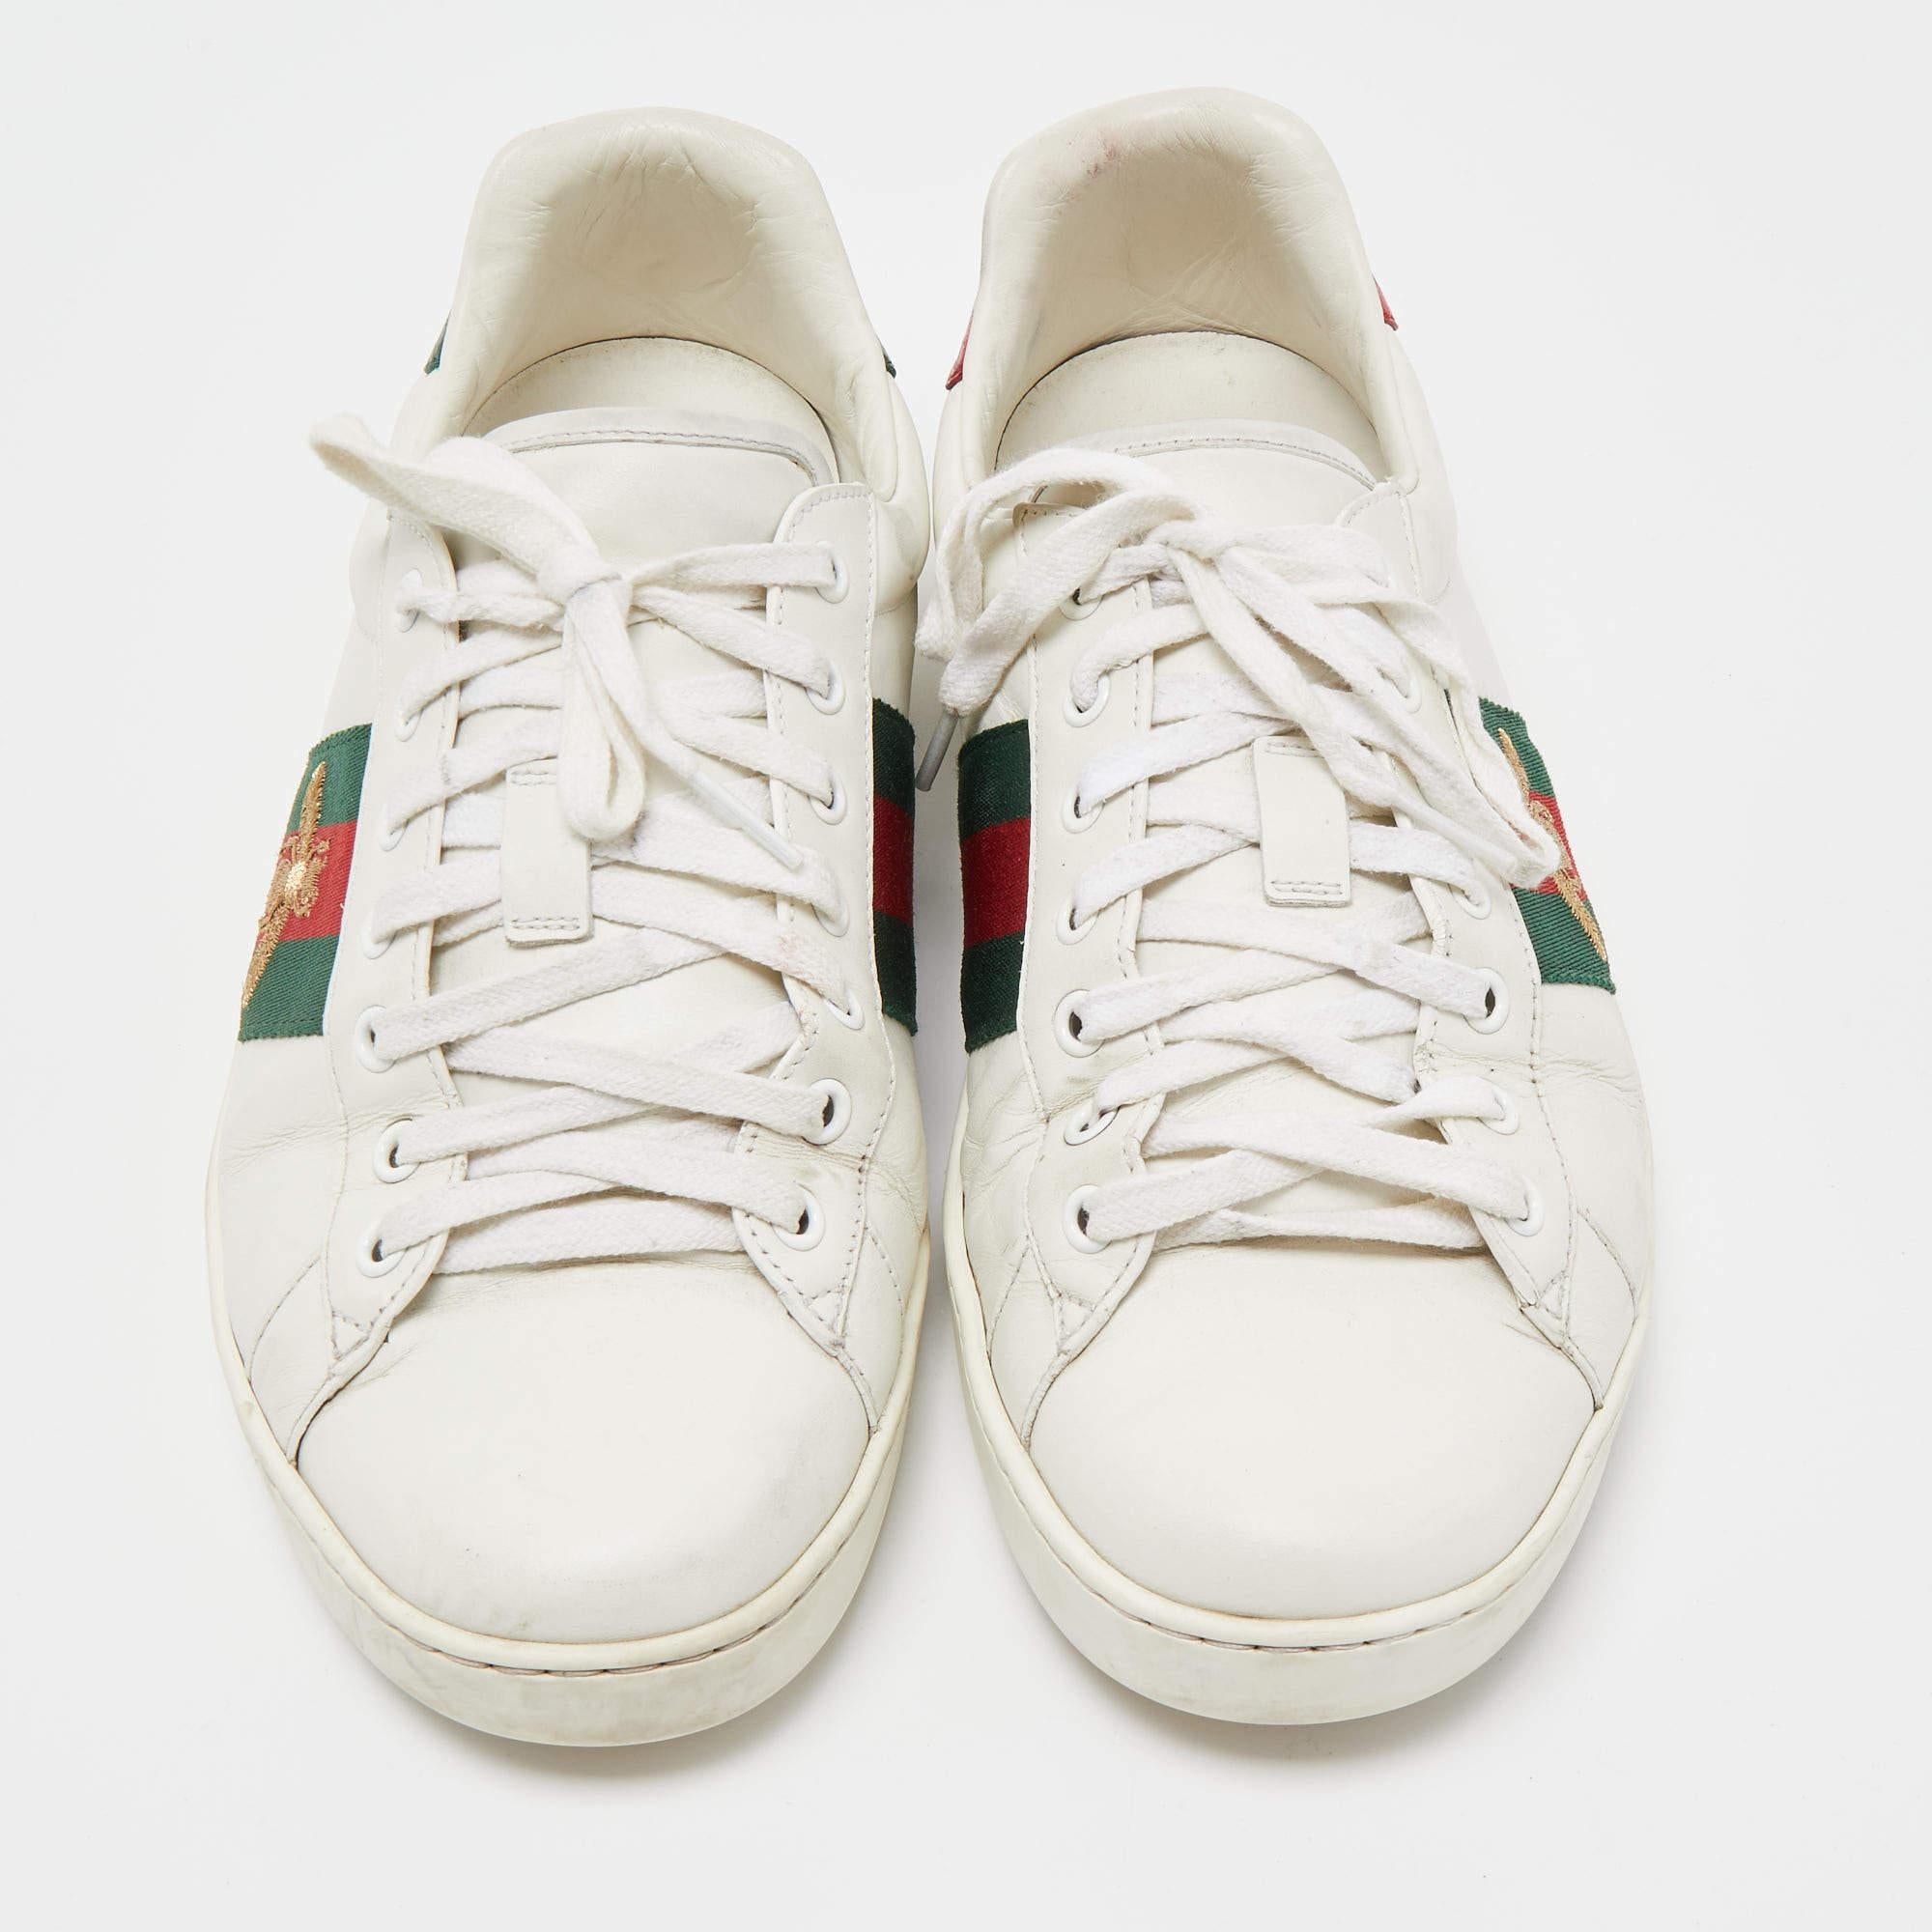 Gucci White Leather Embroidered Bee Ace Sneakers Size 43 For Sale 1